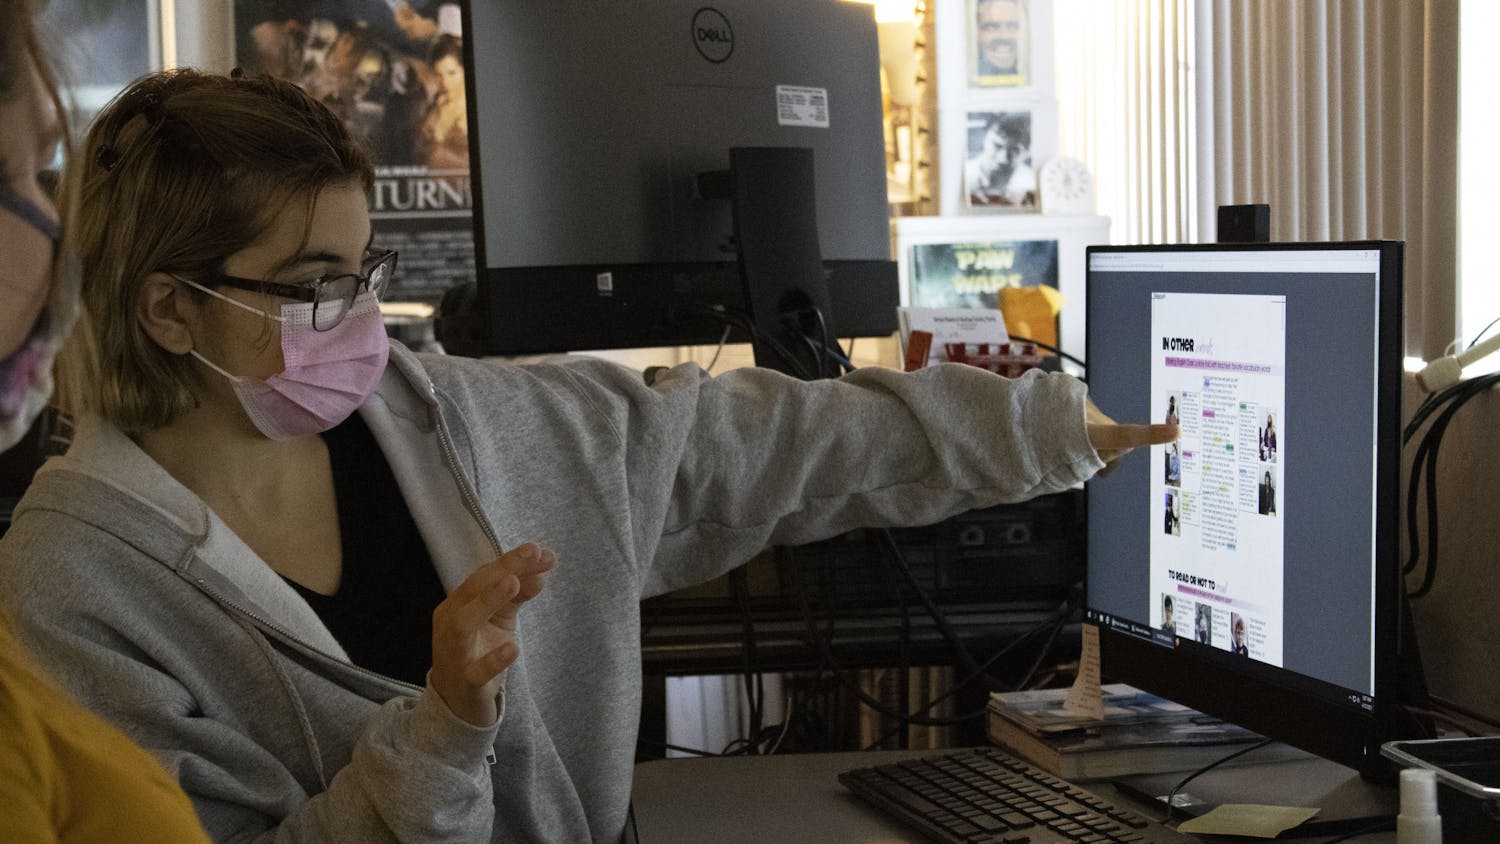 Reyhan Kepic, 18, a senior at Gainesville High School and the editor-in-chief of the school’s yearbook points at a computer screen as she explains the layout of a page spread in the GHS yearbook on Monday, April 12, 2021.